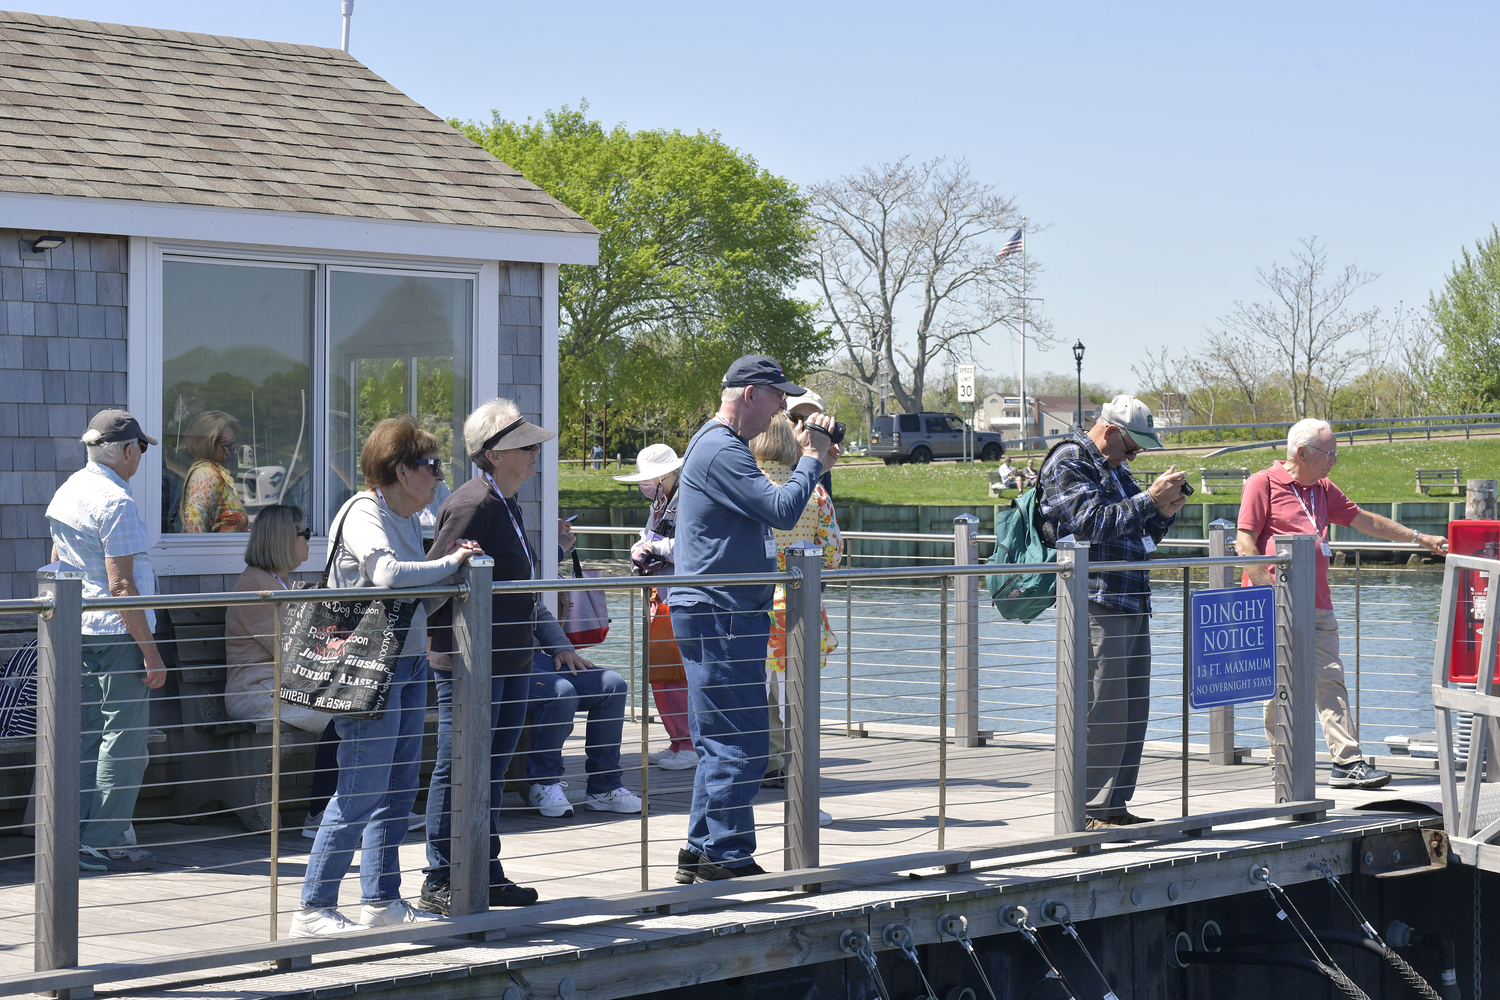 American Cruise Line passengers wait for their launch back to their ship at the dock in Sag Harbor on Tuesday.   DANA SHAW